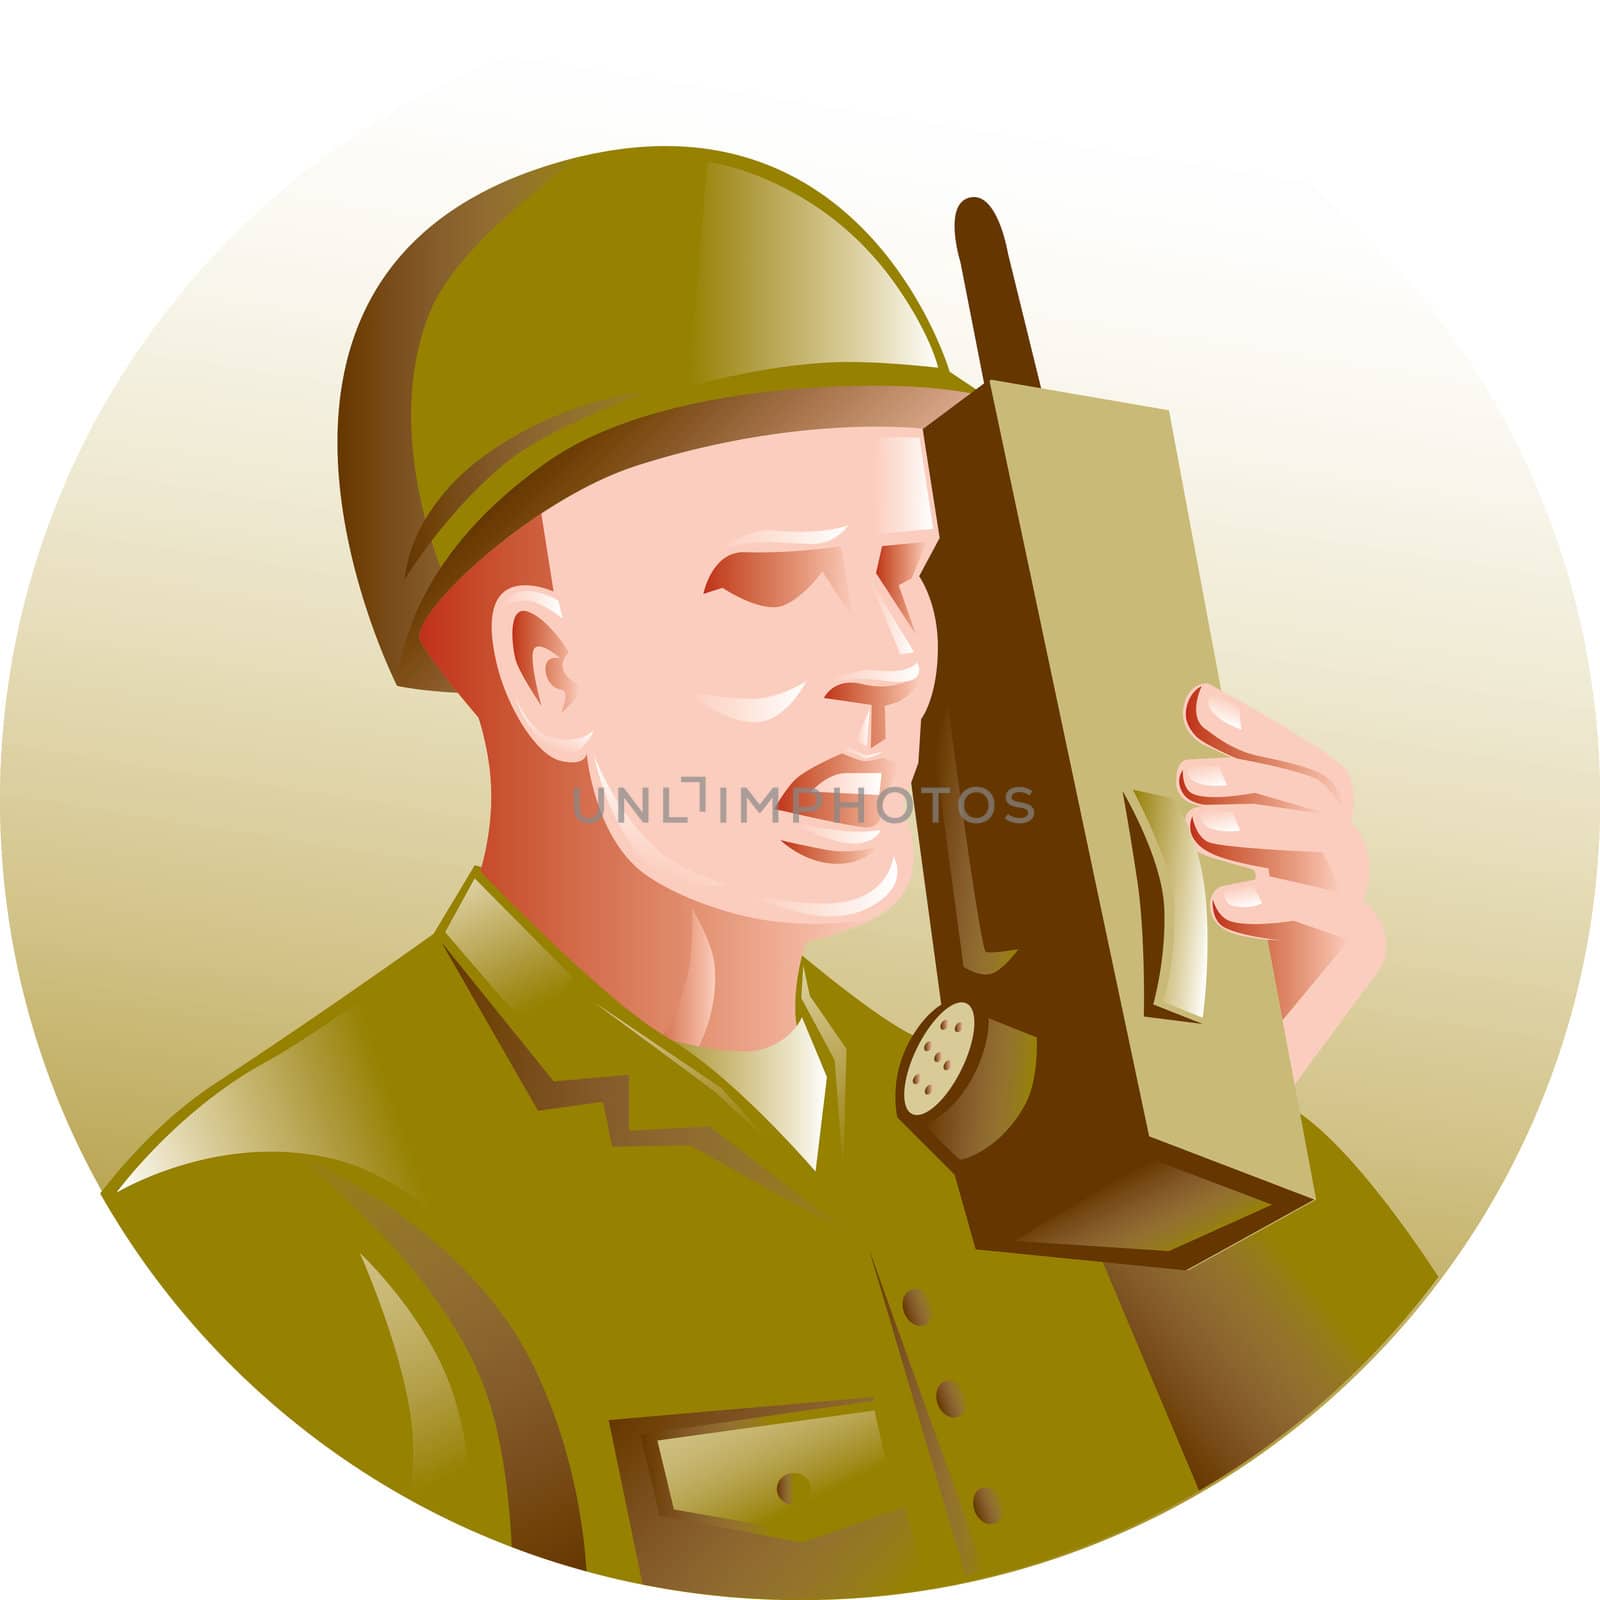 illustration of a military soldier talking on radio walkie-talkie set inside circle done in retro style.